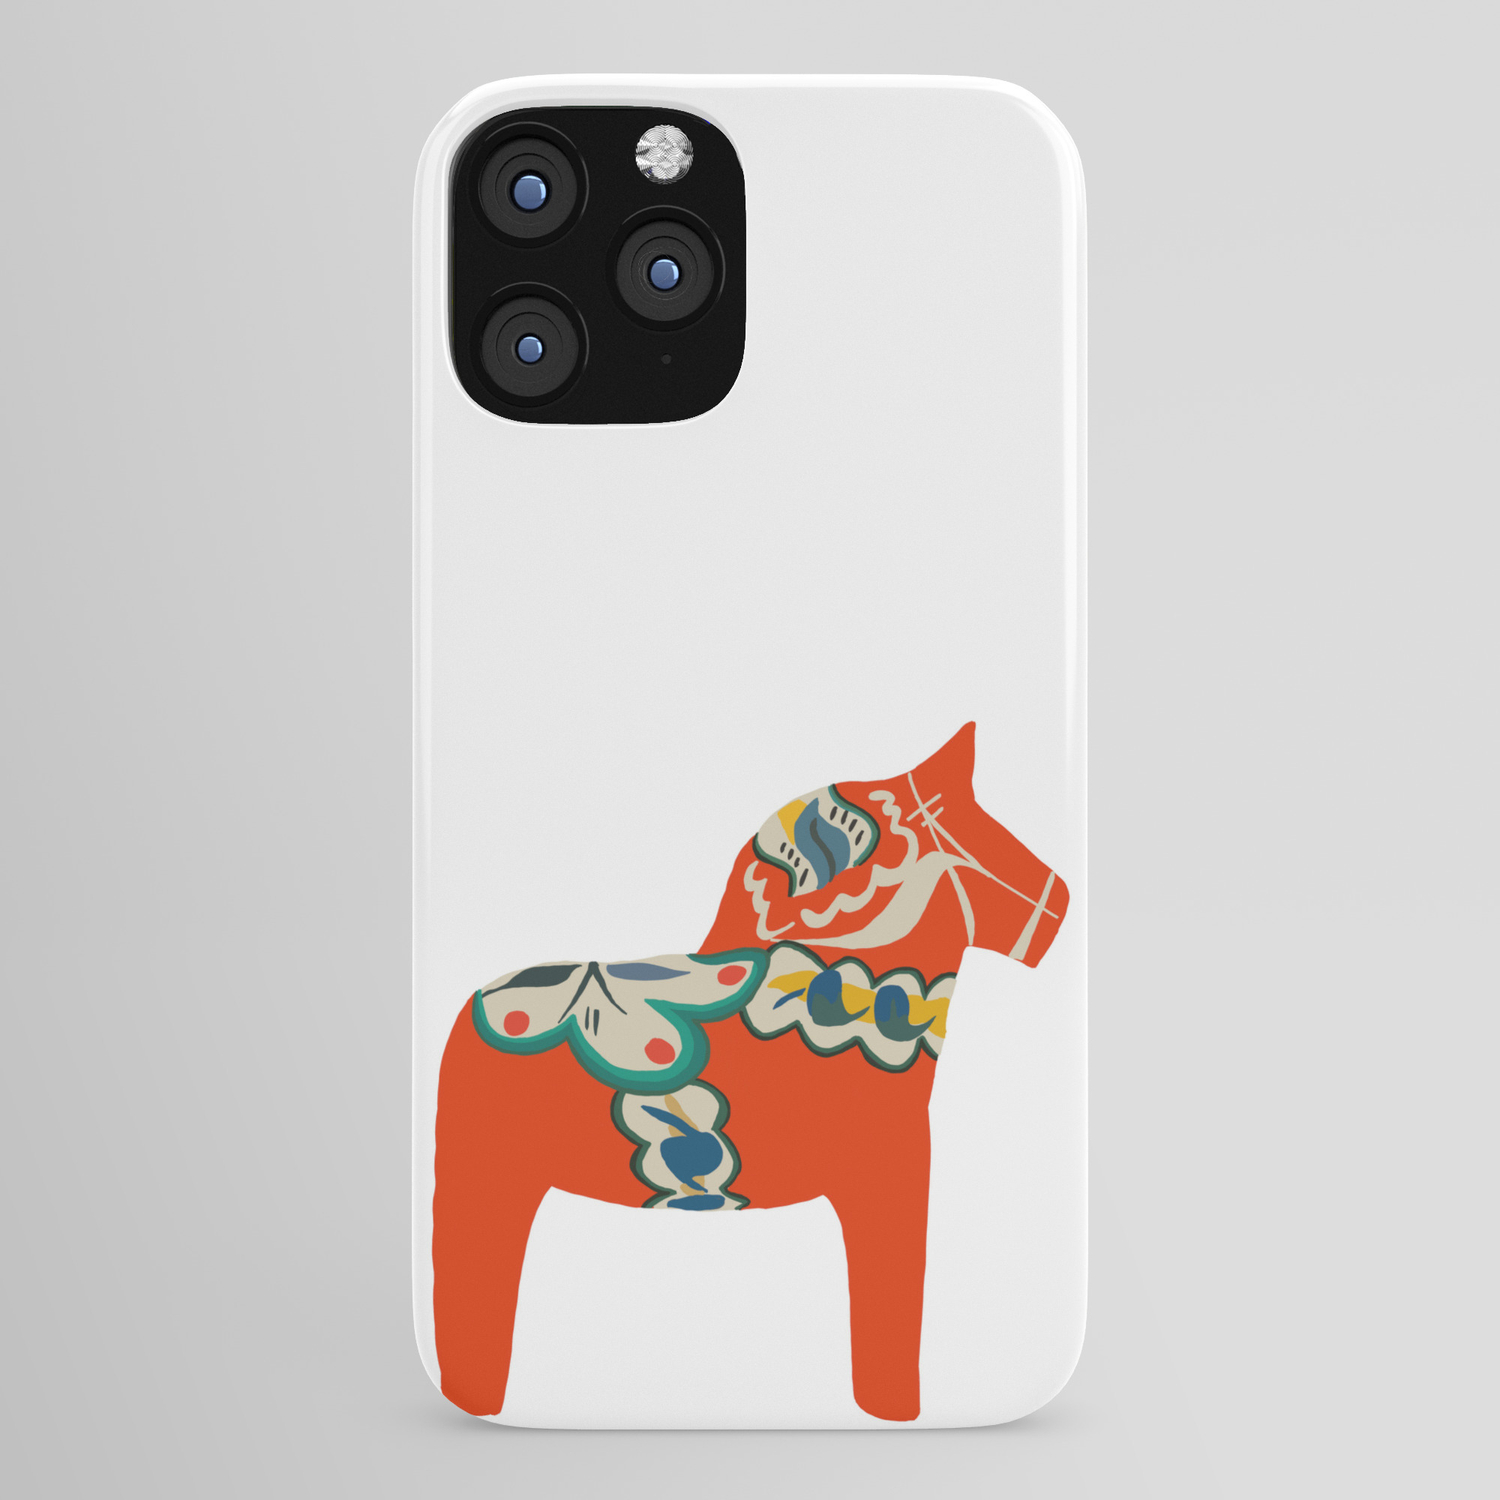 Swedish Dala Horses Red Phone Case Compatible With Iphone 11 12 6 8 7 X Se Xr 6s Xs Pro Max Mini Shockproof Drop Protective Waterproof